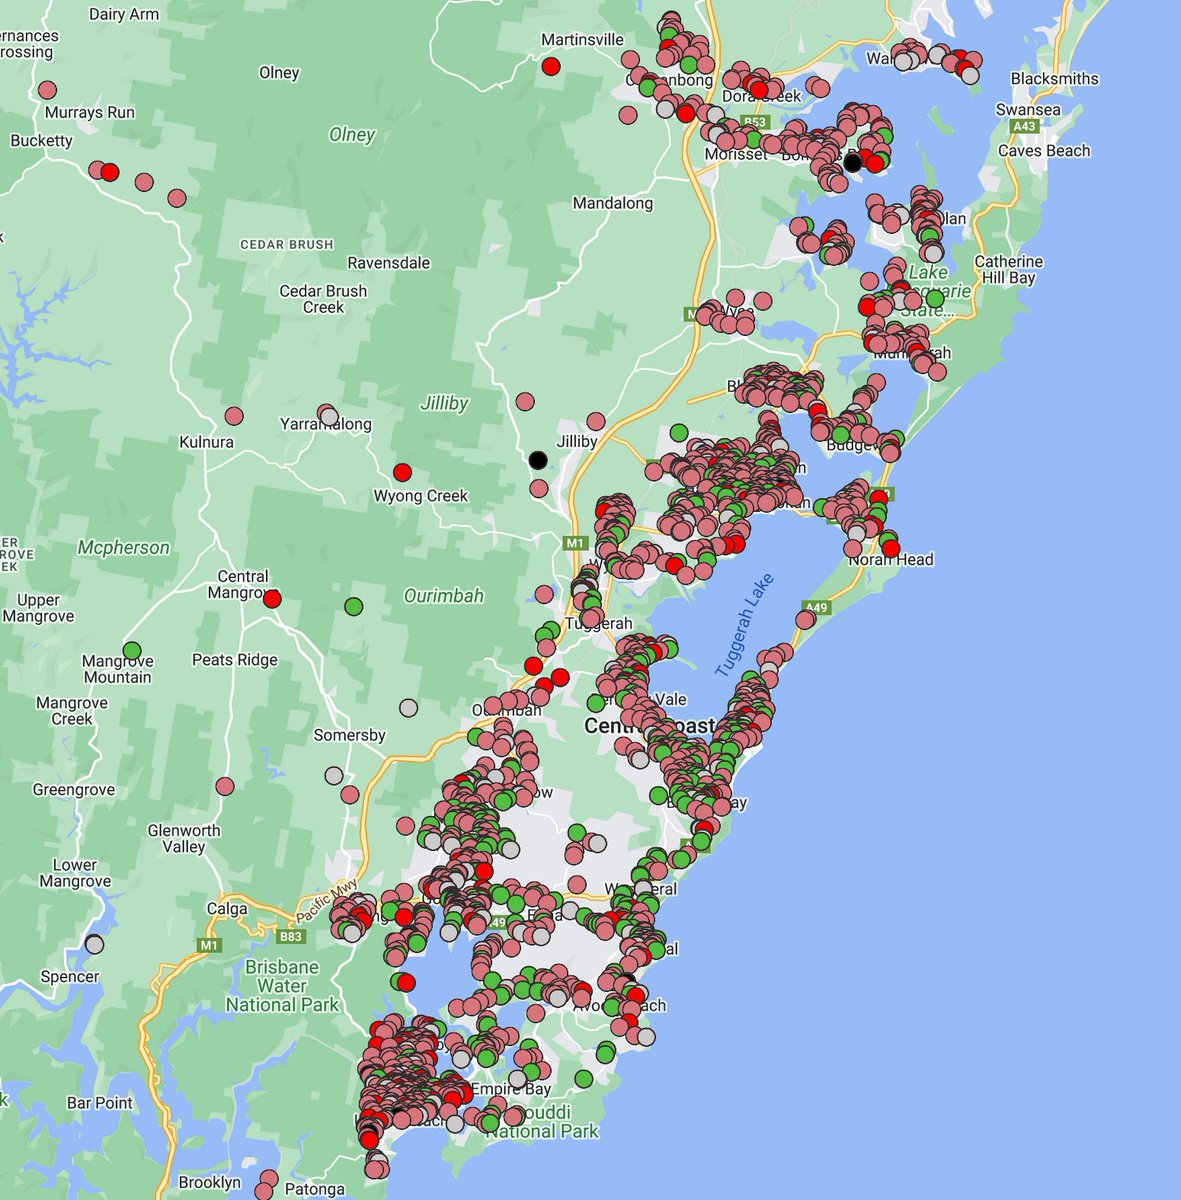 #Centralcoast #NSW sold map over the last 6 months. Many -10% decreases from the original listing price.
Spachus.com.au